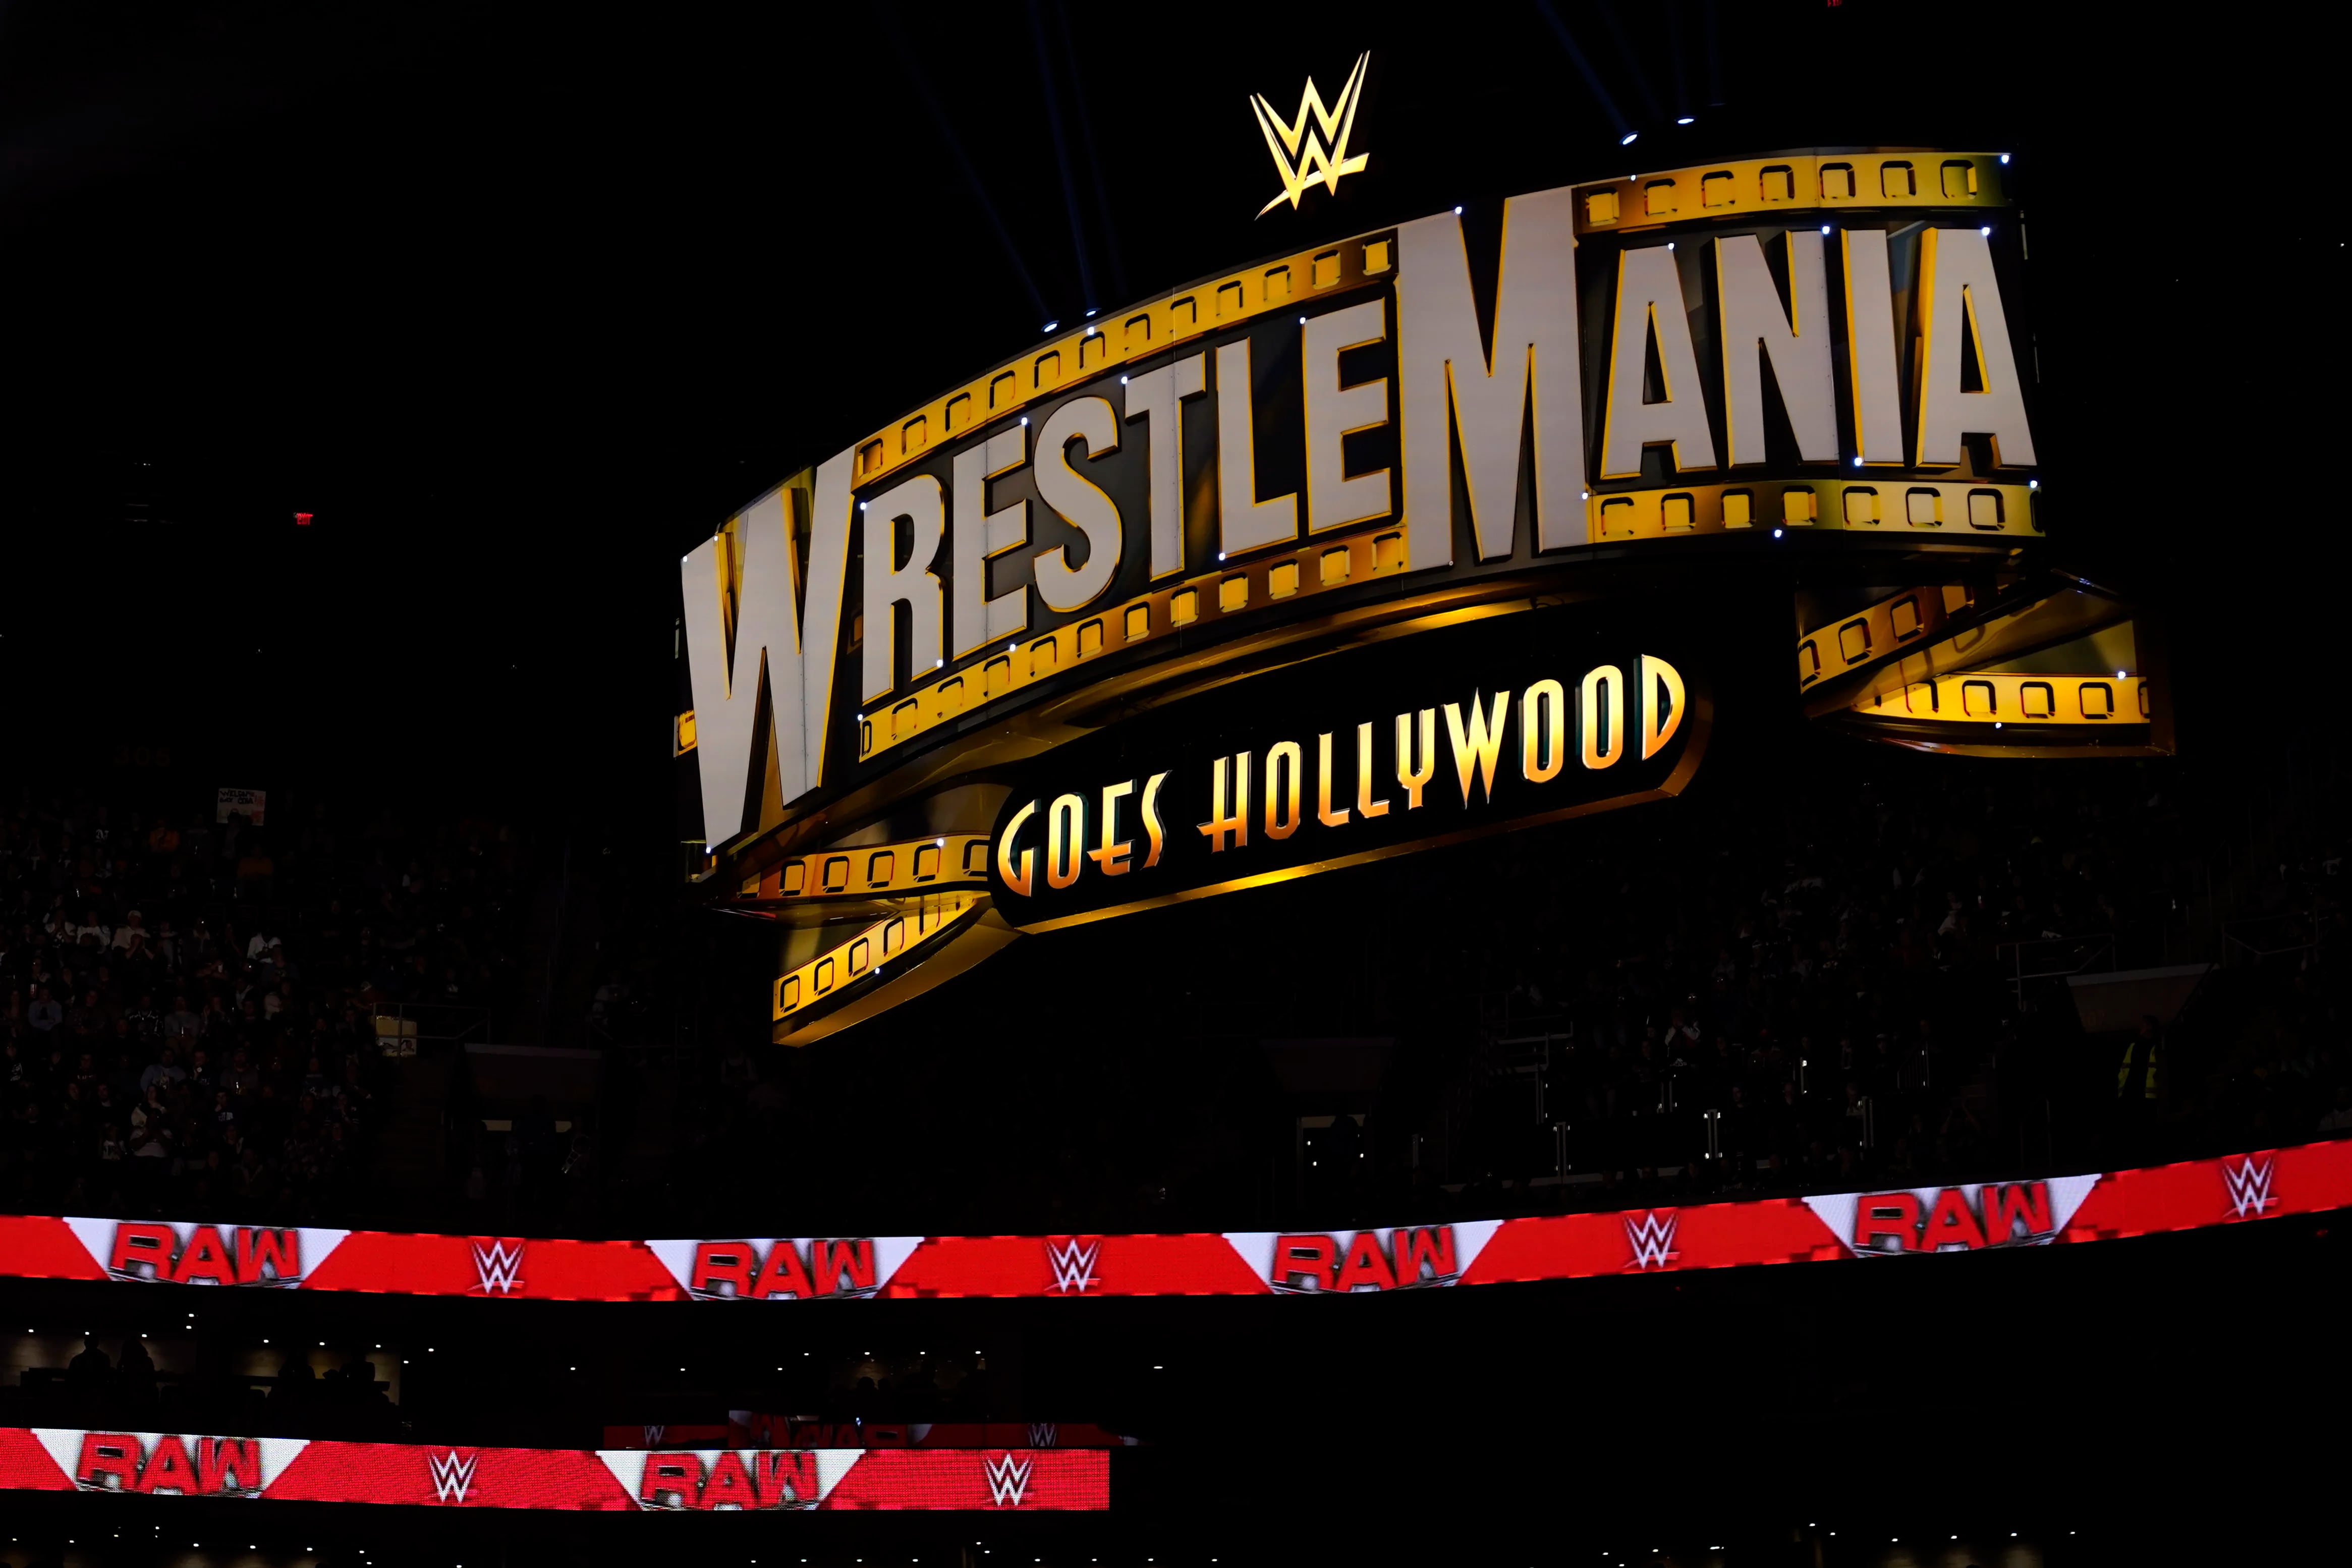 A WrestleMania sign hangs over the crowd during s WWE "Monday Night RAW" event in Boston in March.